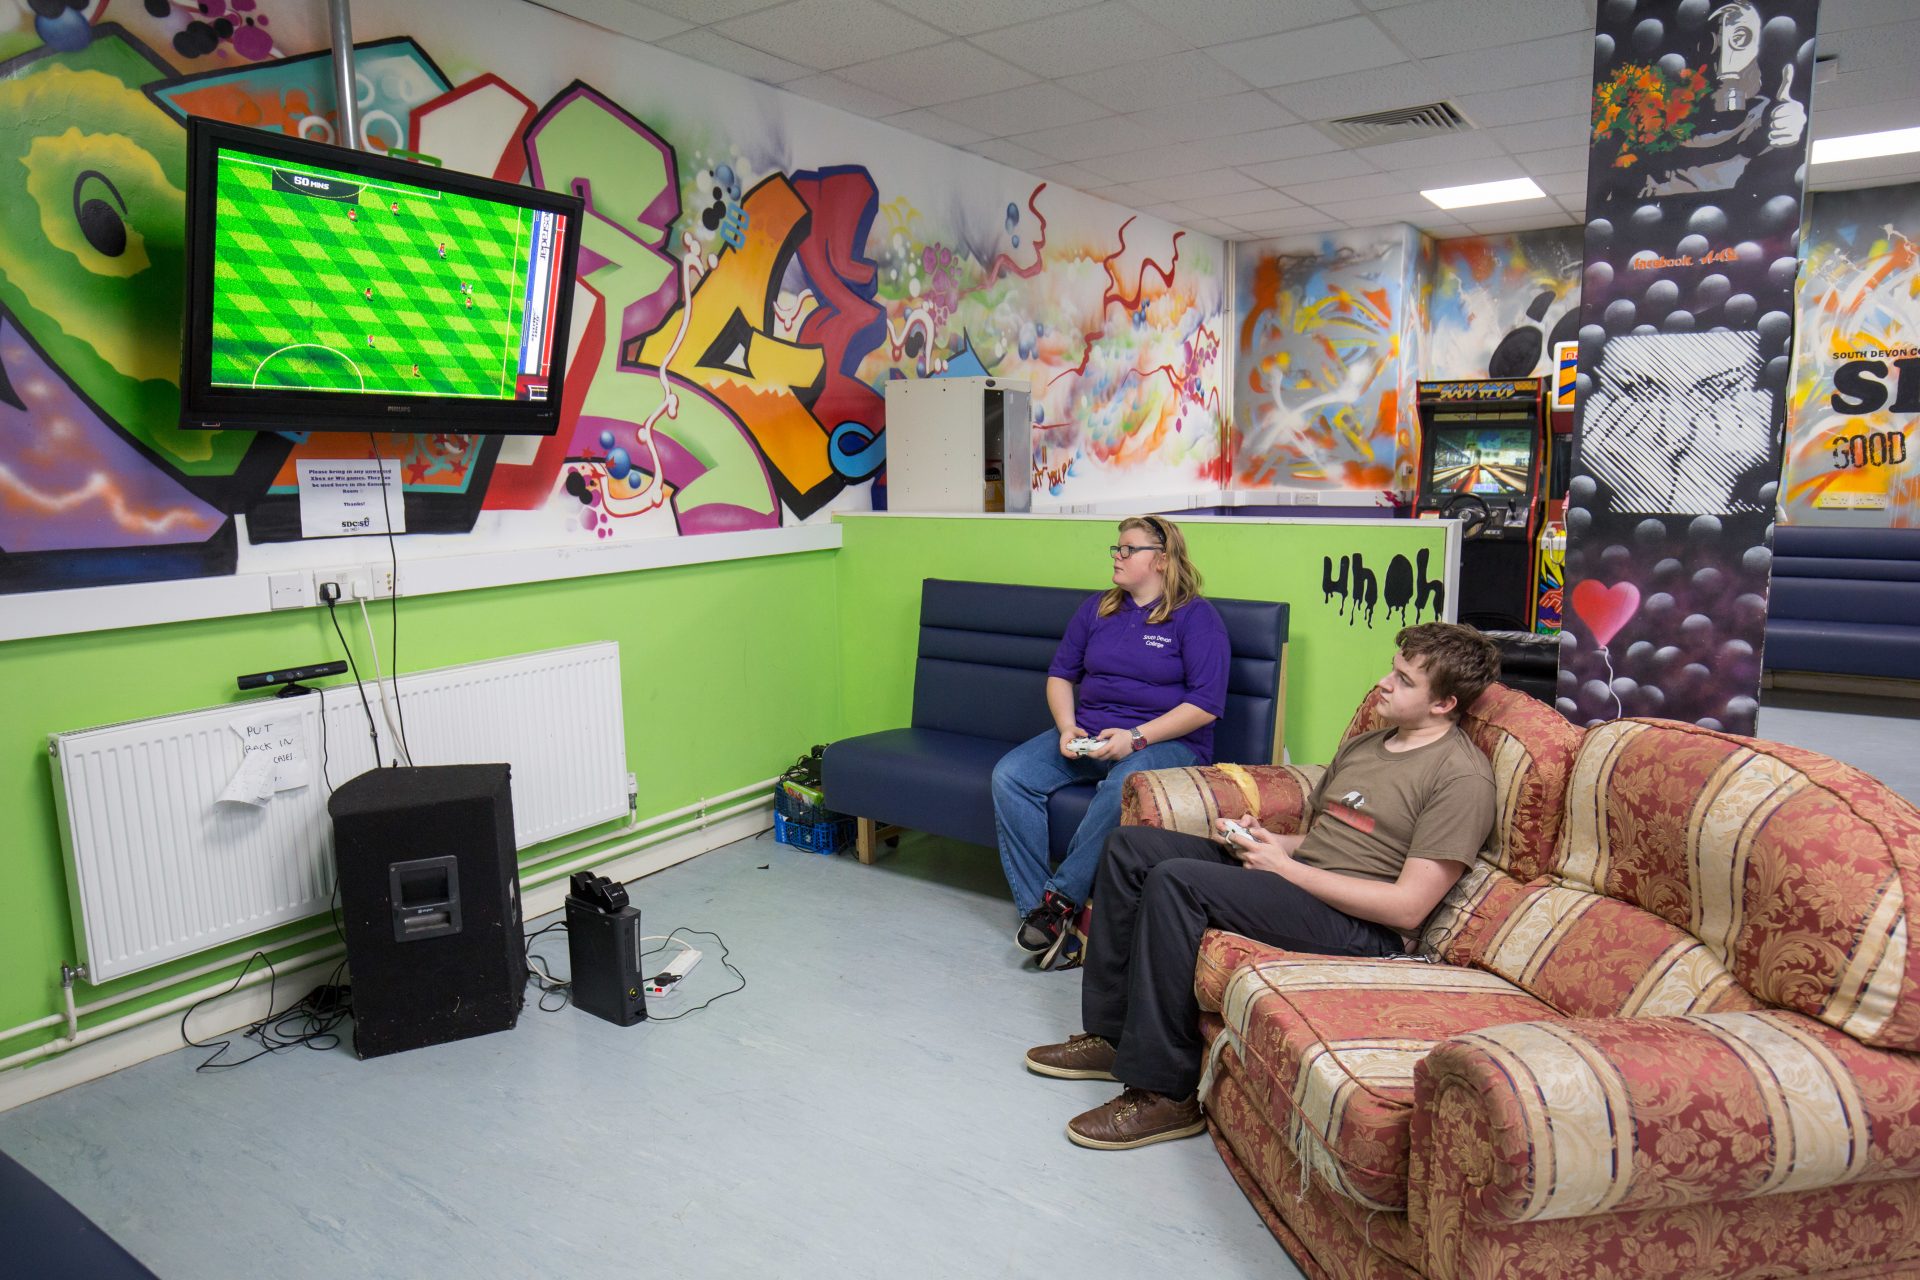 Students playing Fifa in the student union common room